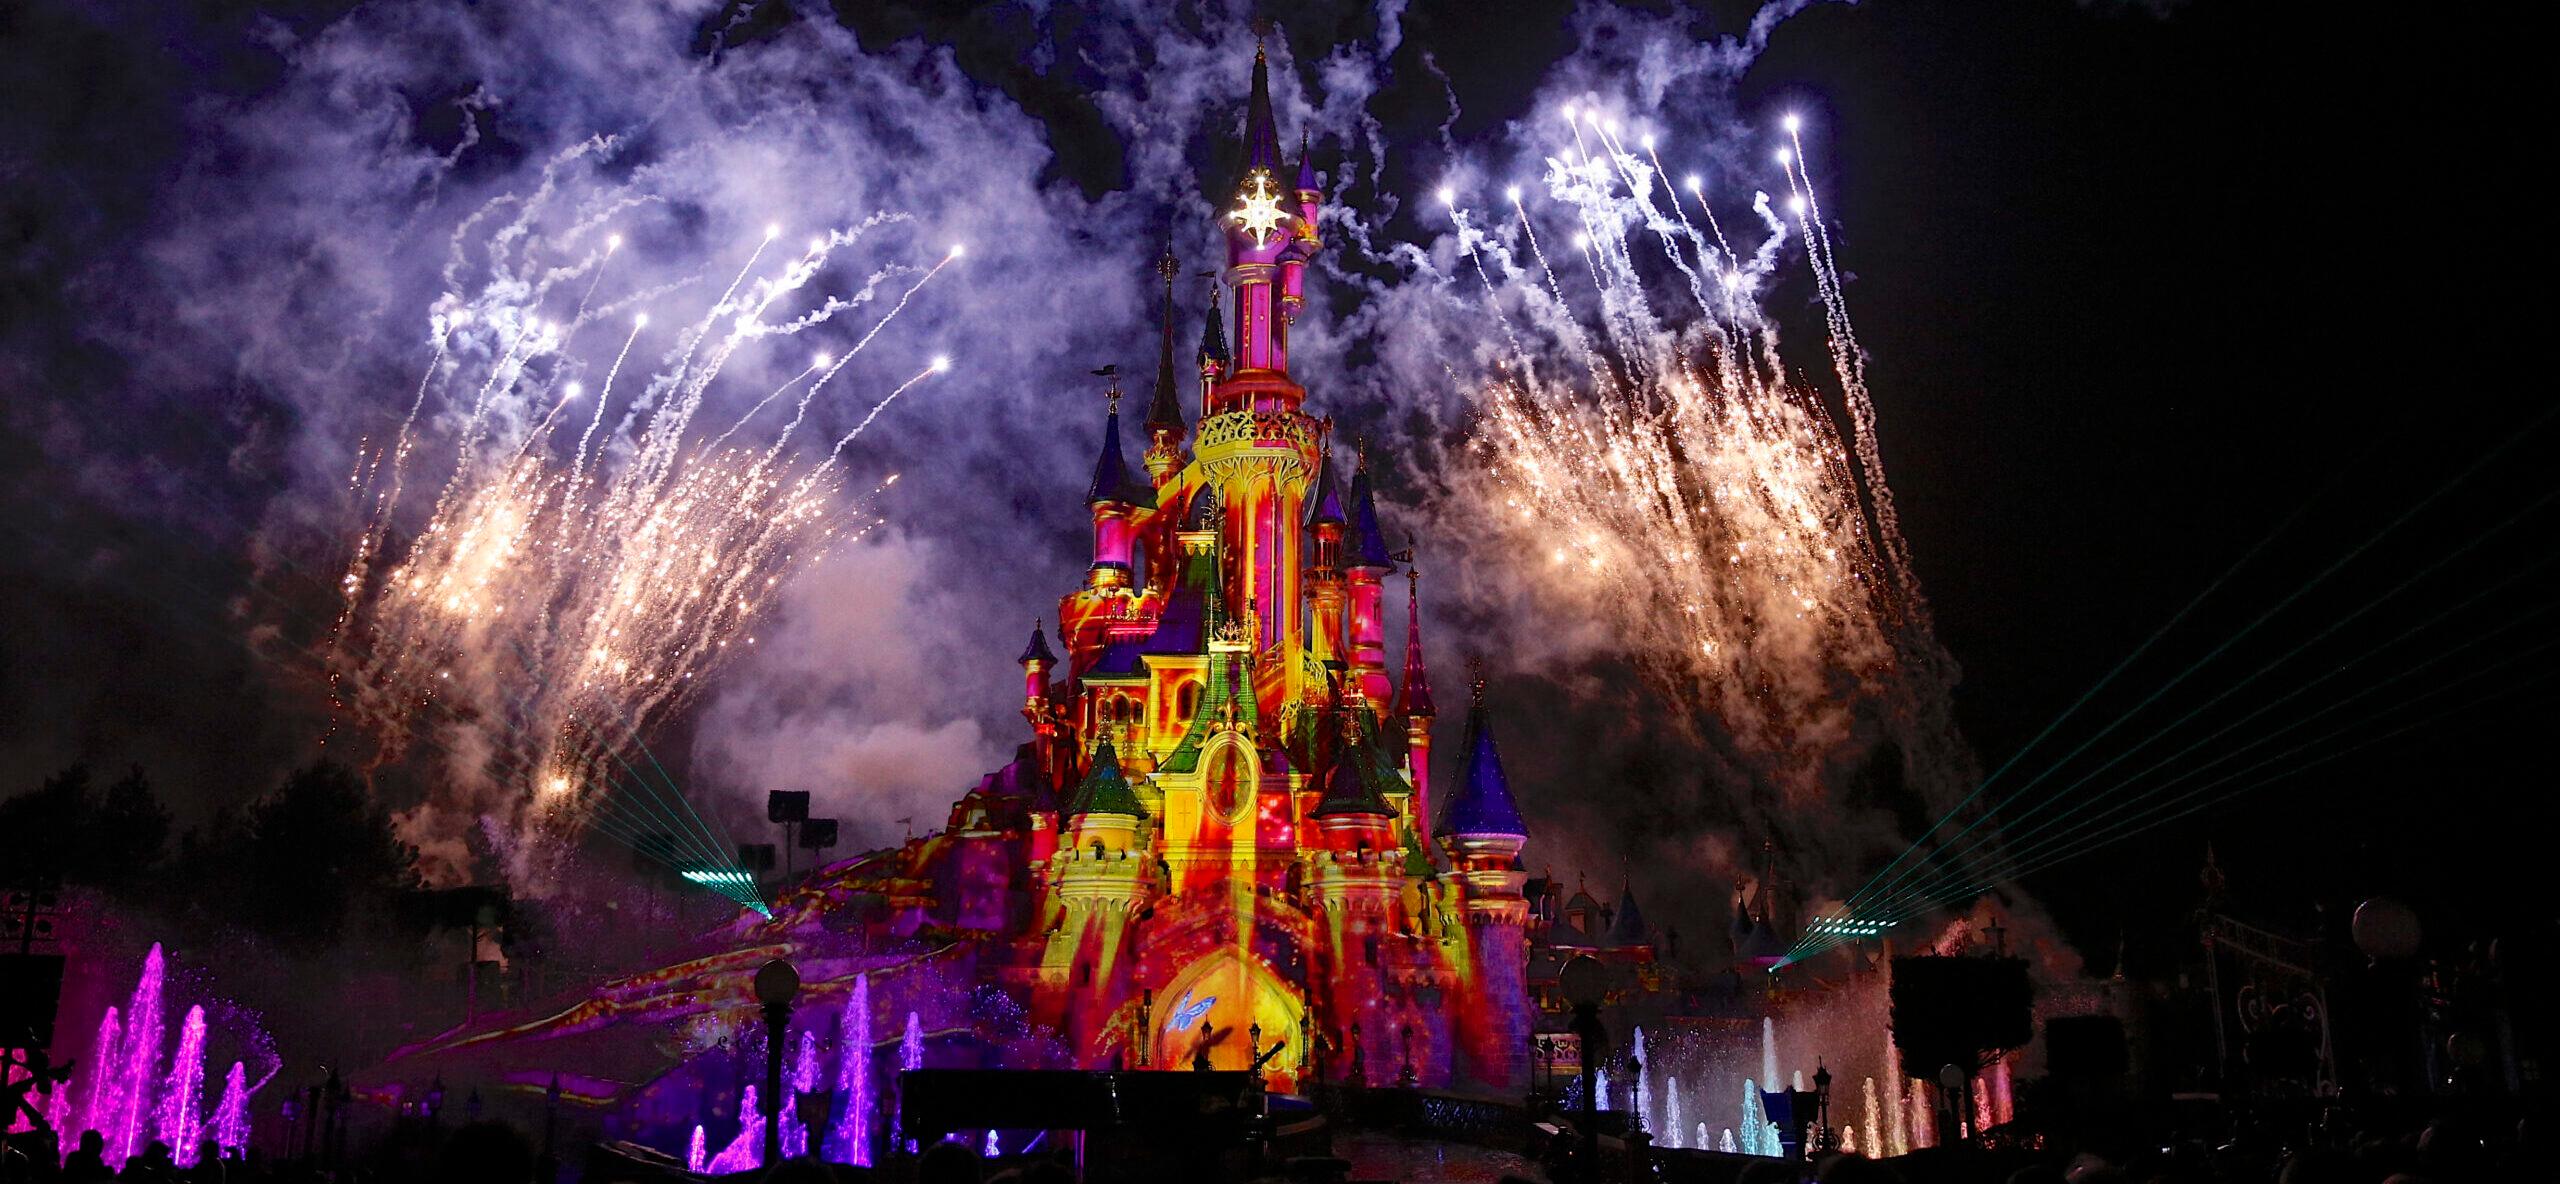 You Can Visit All Of The Disney Parks On A Private Jet For $115k